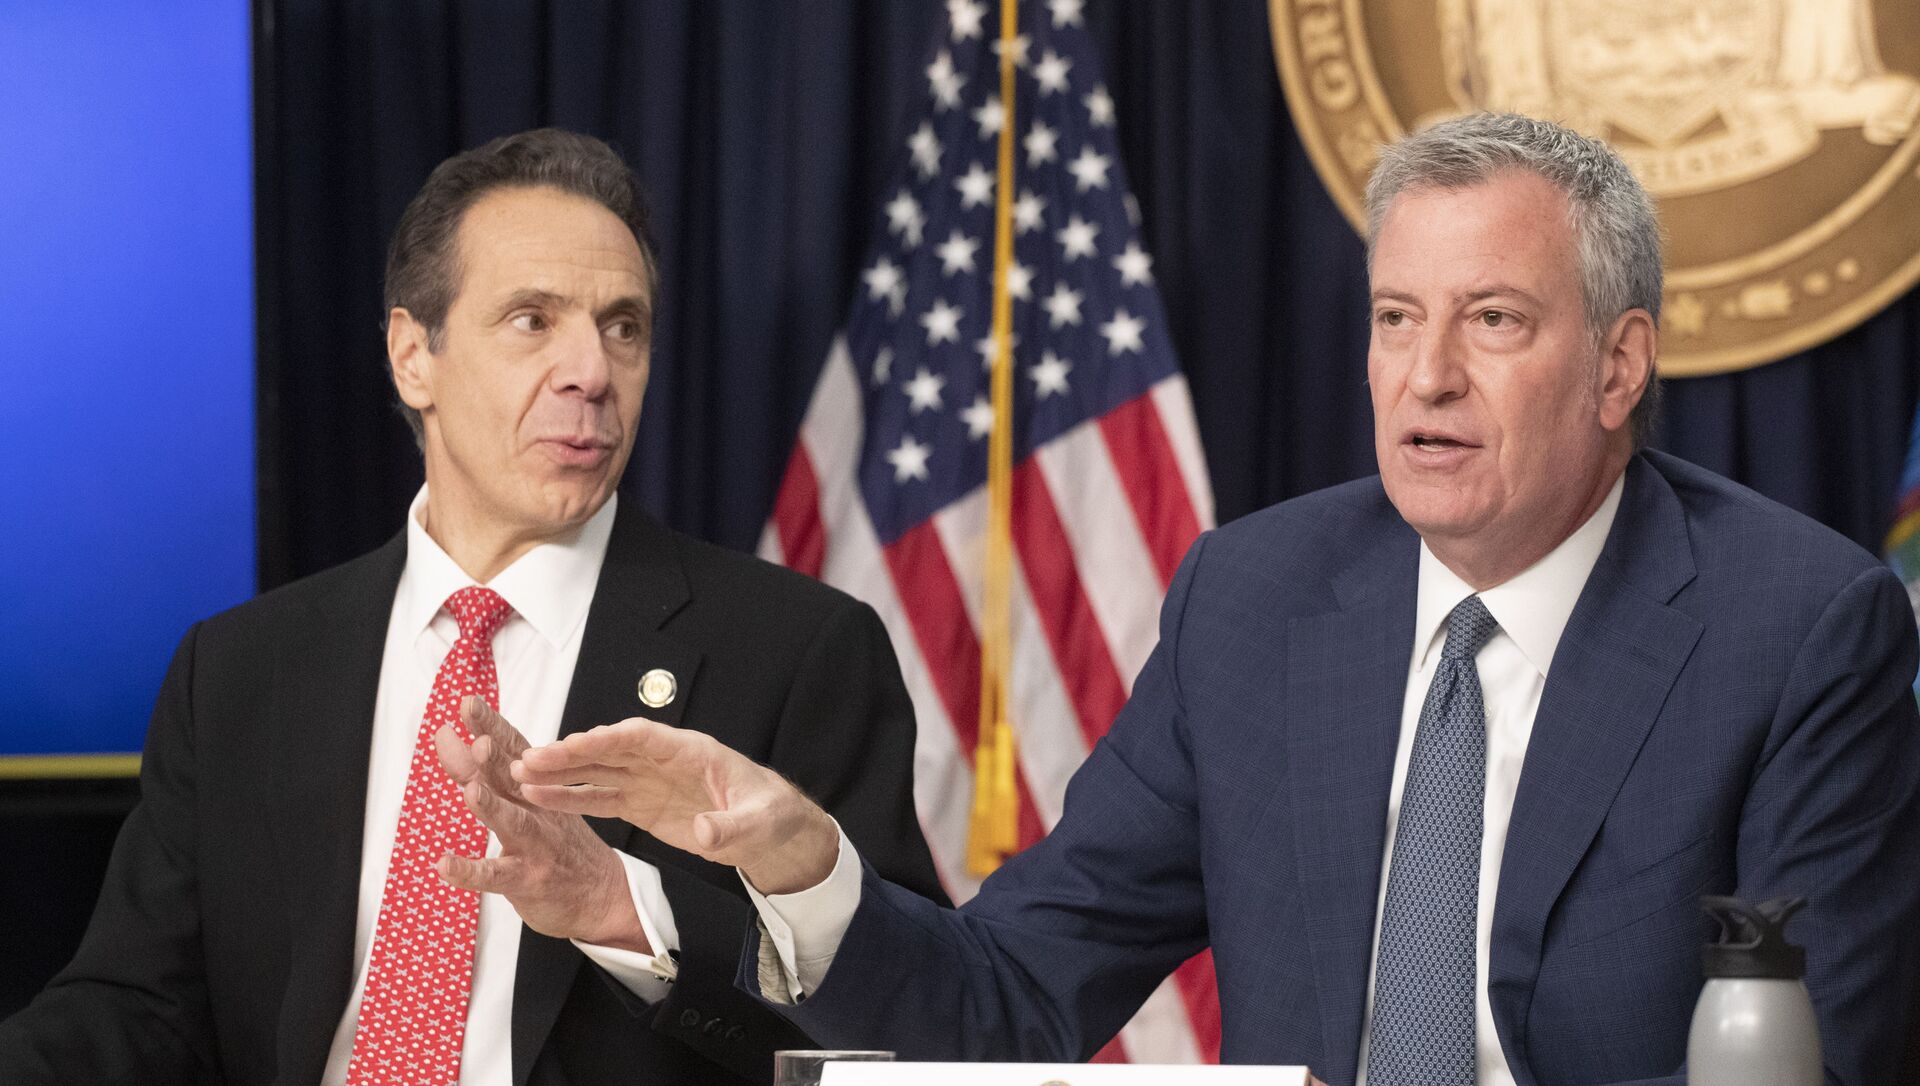 New York Gov. Andrew Cuomo, left, and Mayor Bill de Blasio discuss the state and city's preparedness for the spread of coronavirus at a news conference, Monday, March 2, 2020 in New York. - Sputnik International, 1920, 14.03.2021